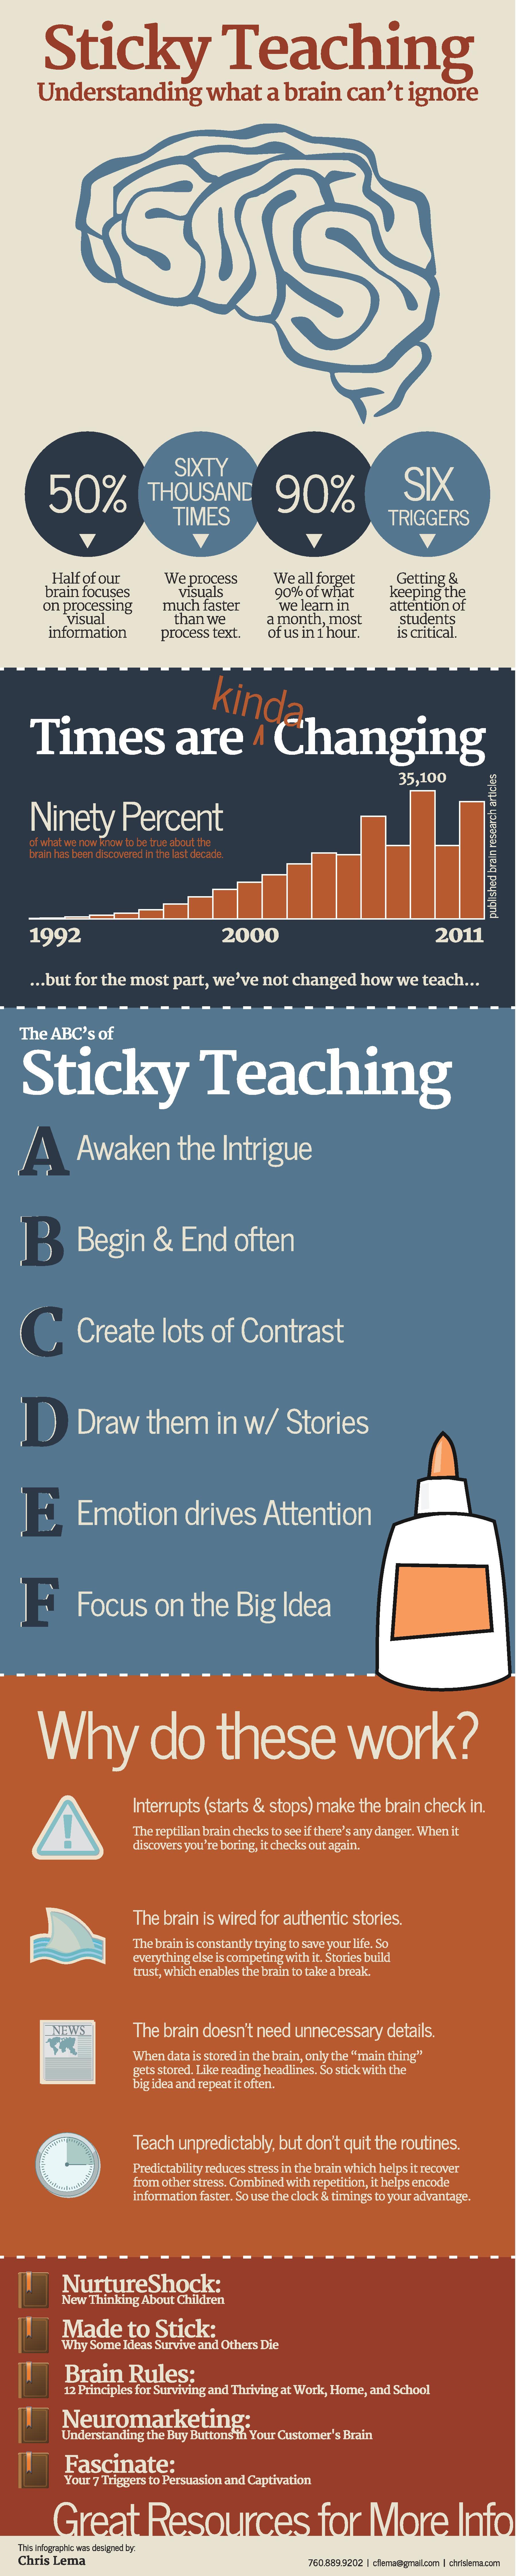 How to Teach Smartly Infographic